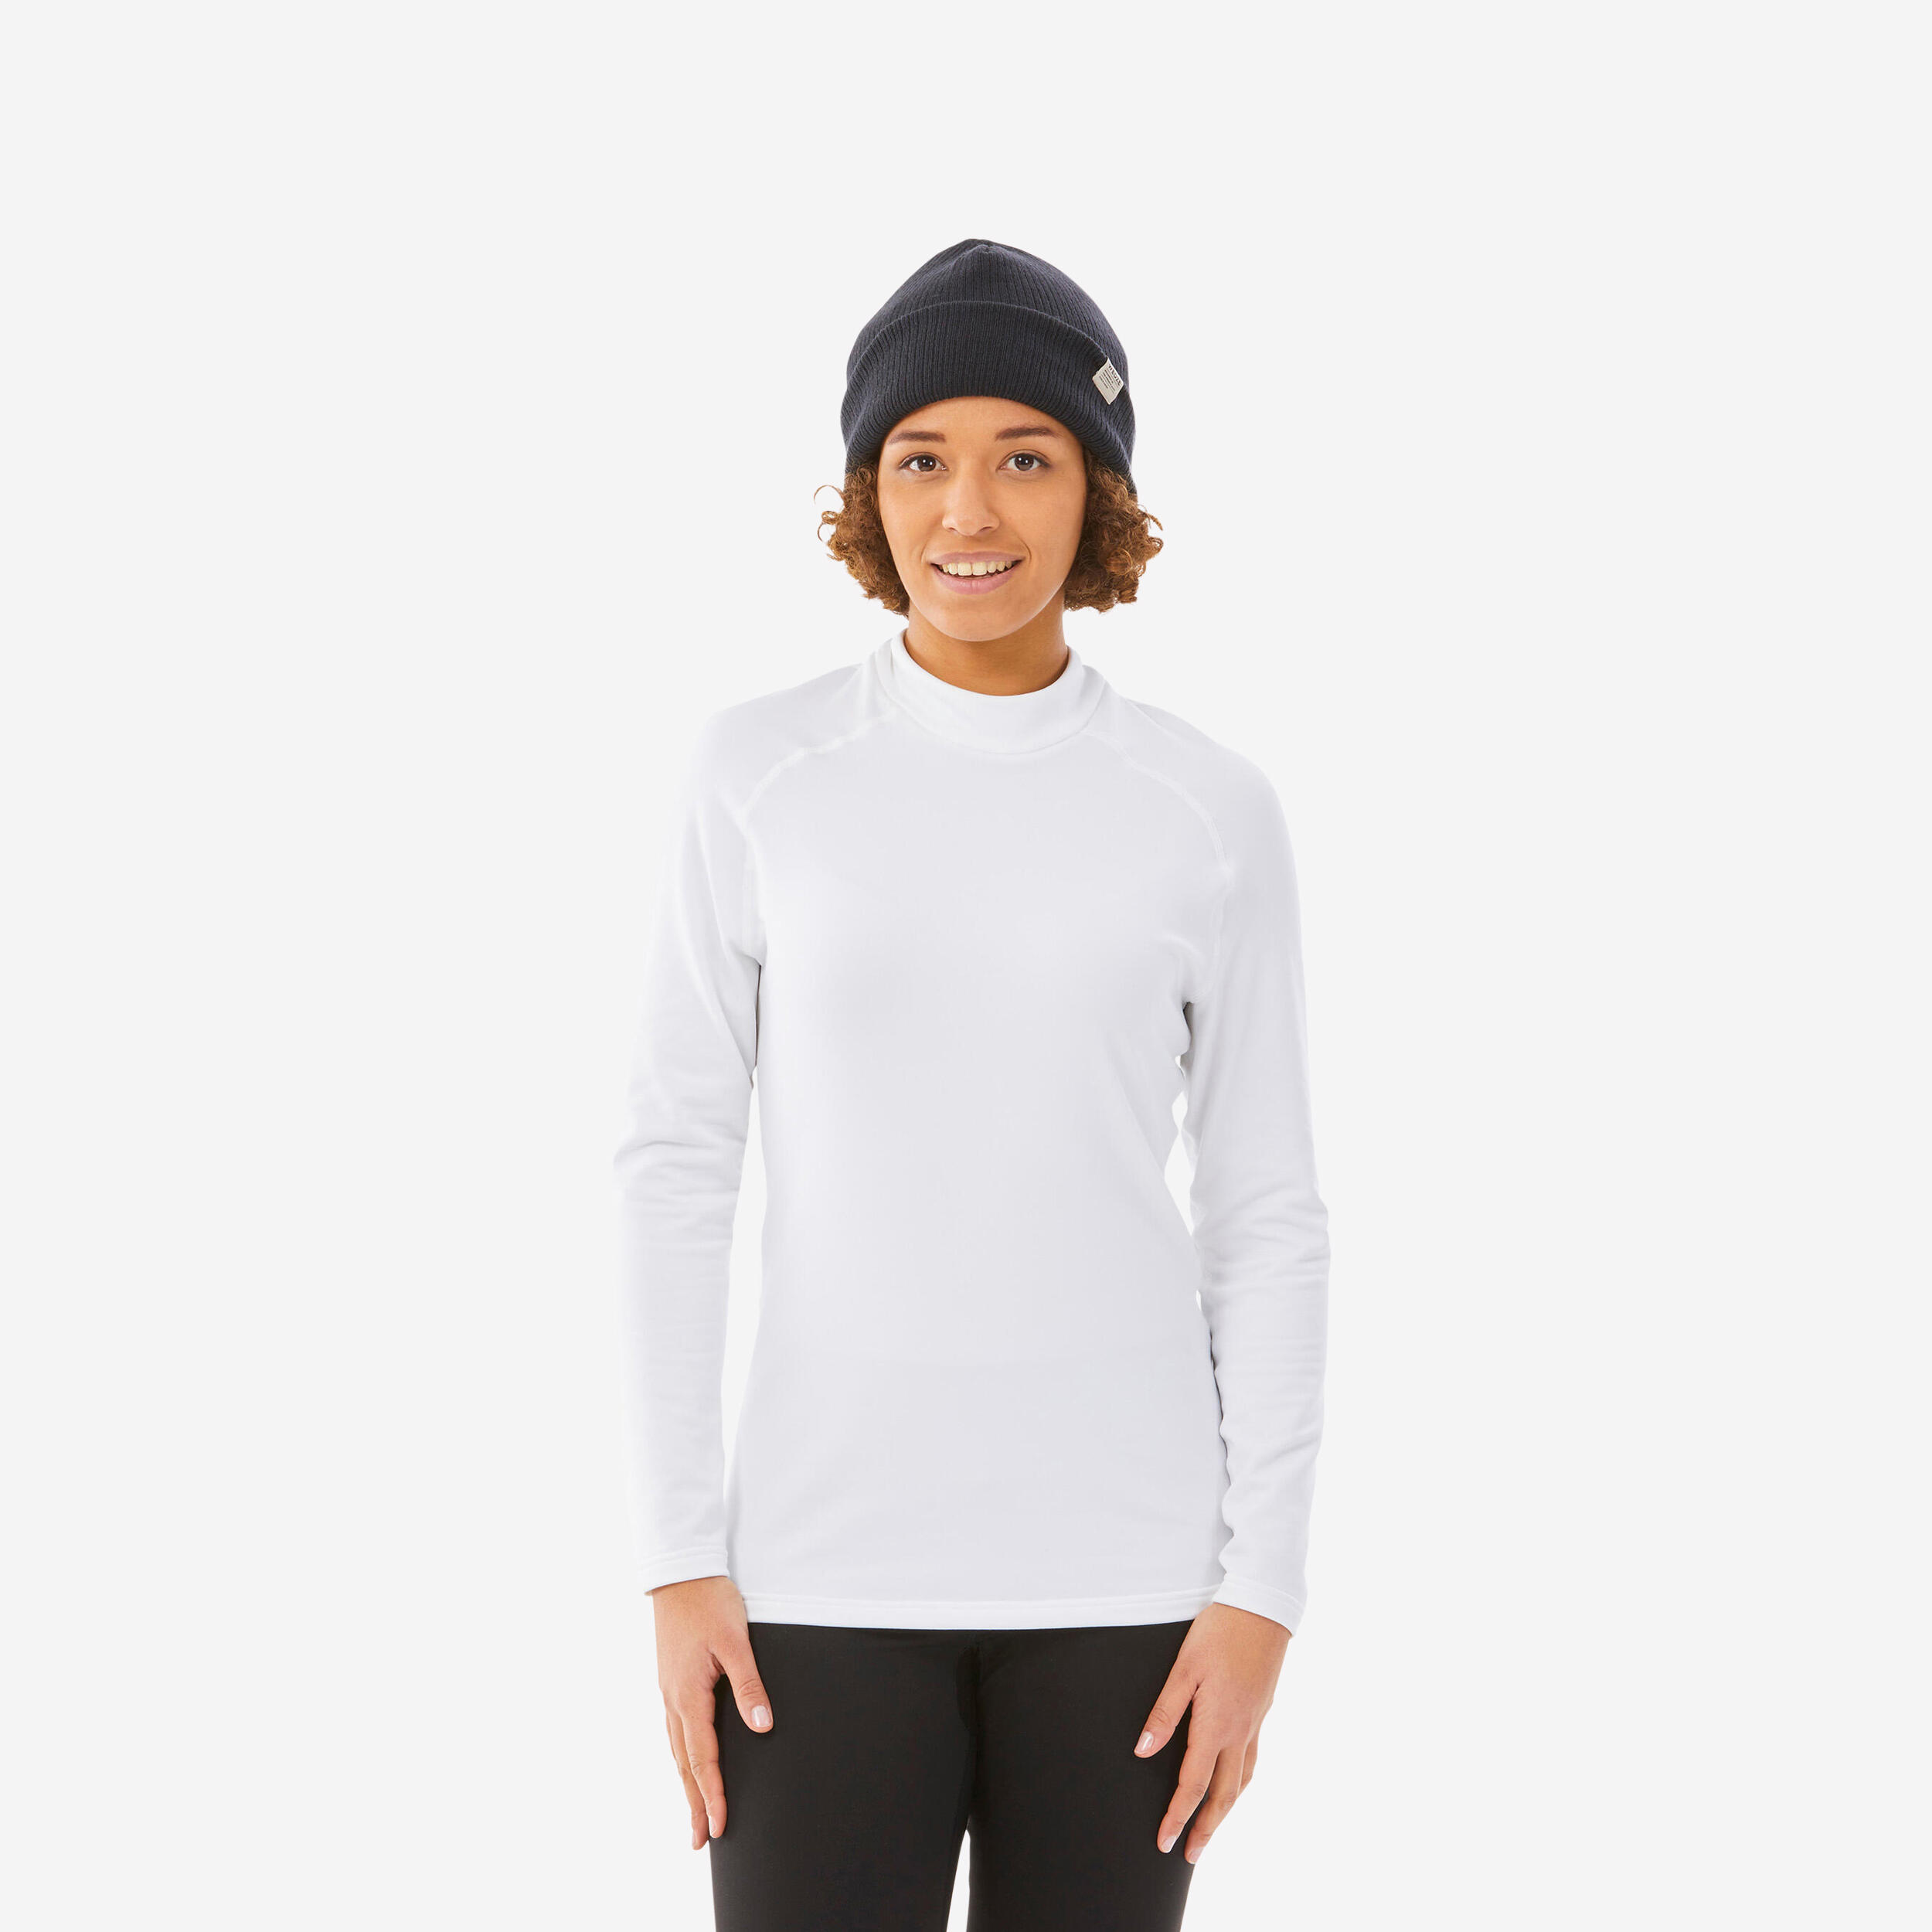 Women’s Breathable Base Layer Top - BL 500 White